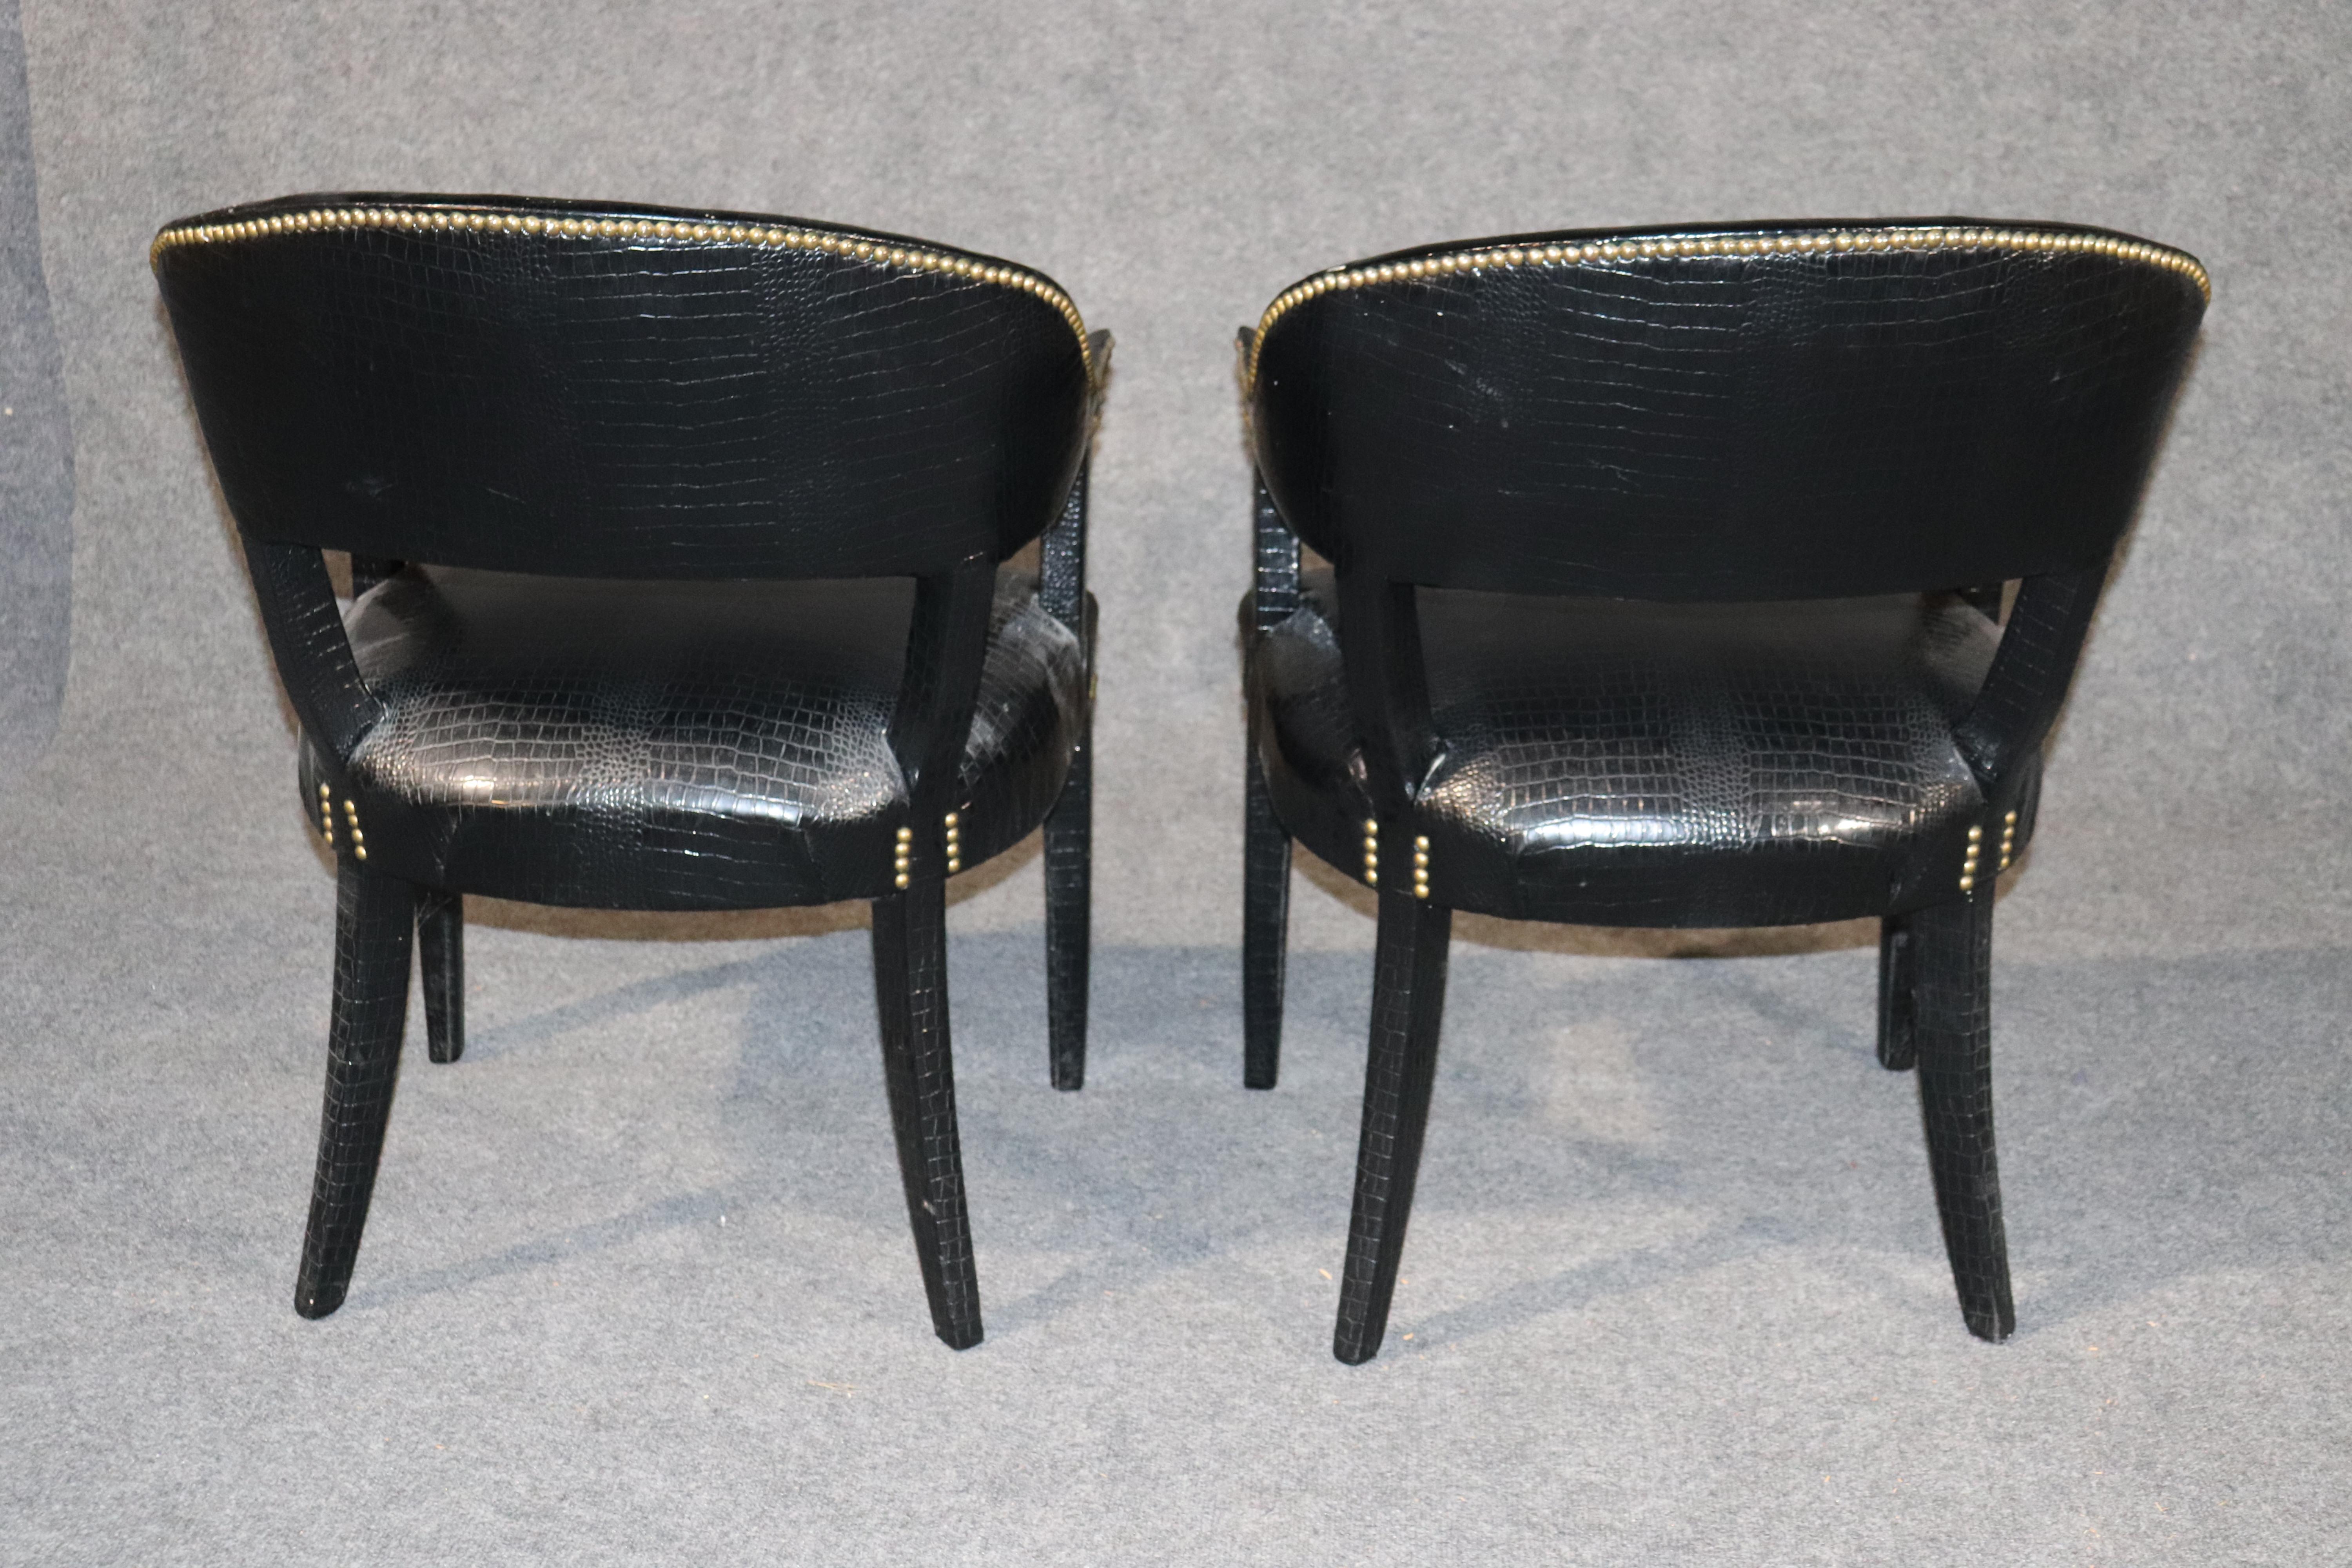 Pair Black Alligator Printed Faux Leather Brass Studded Occasional Office Chairs 1